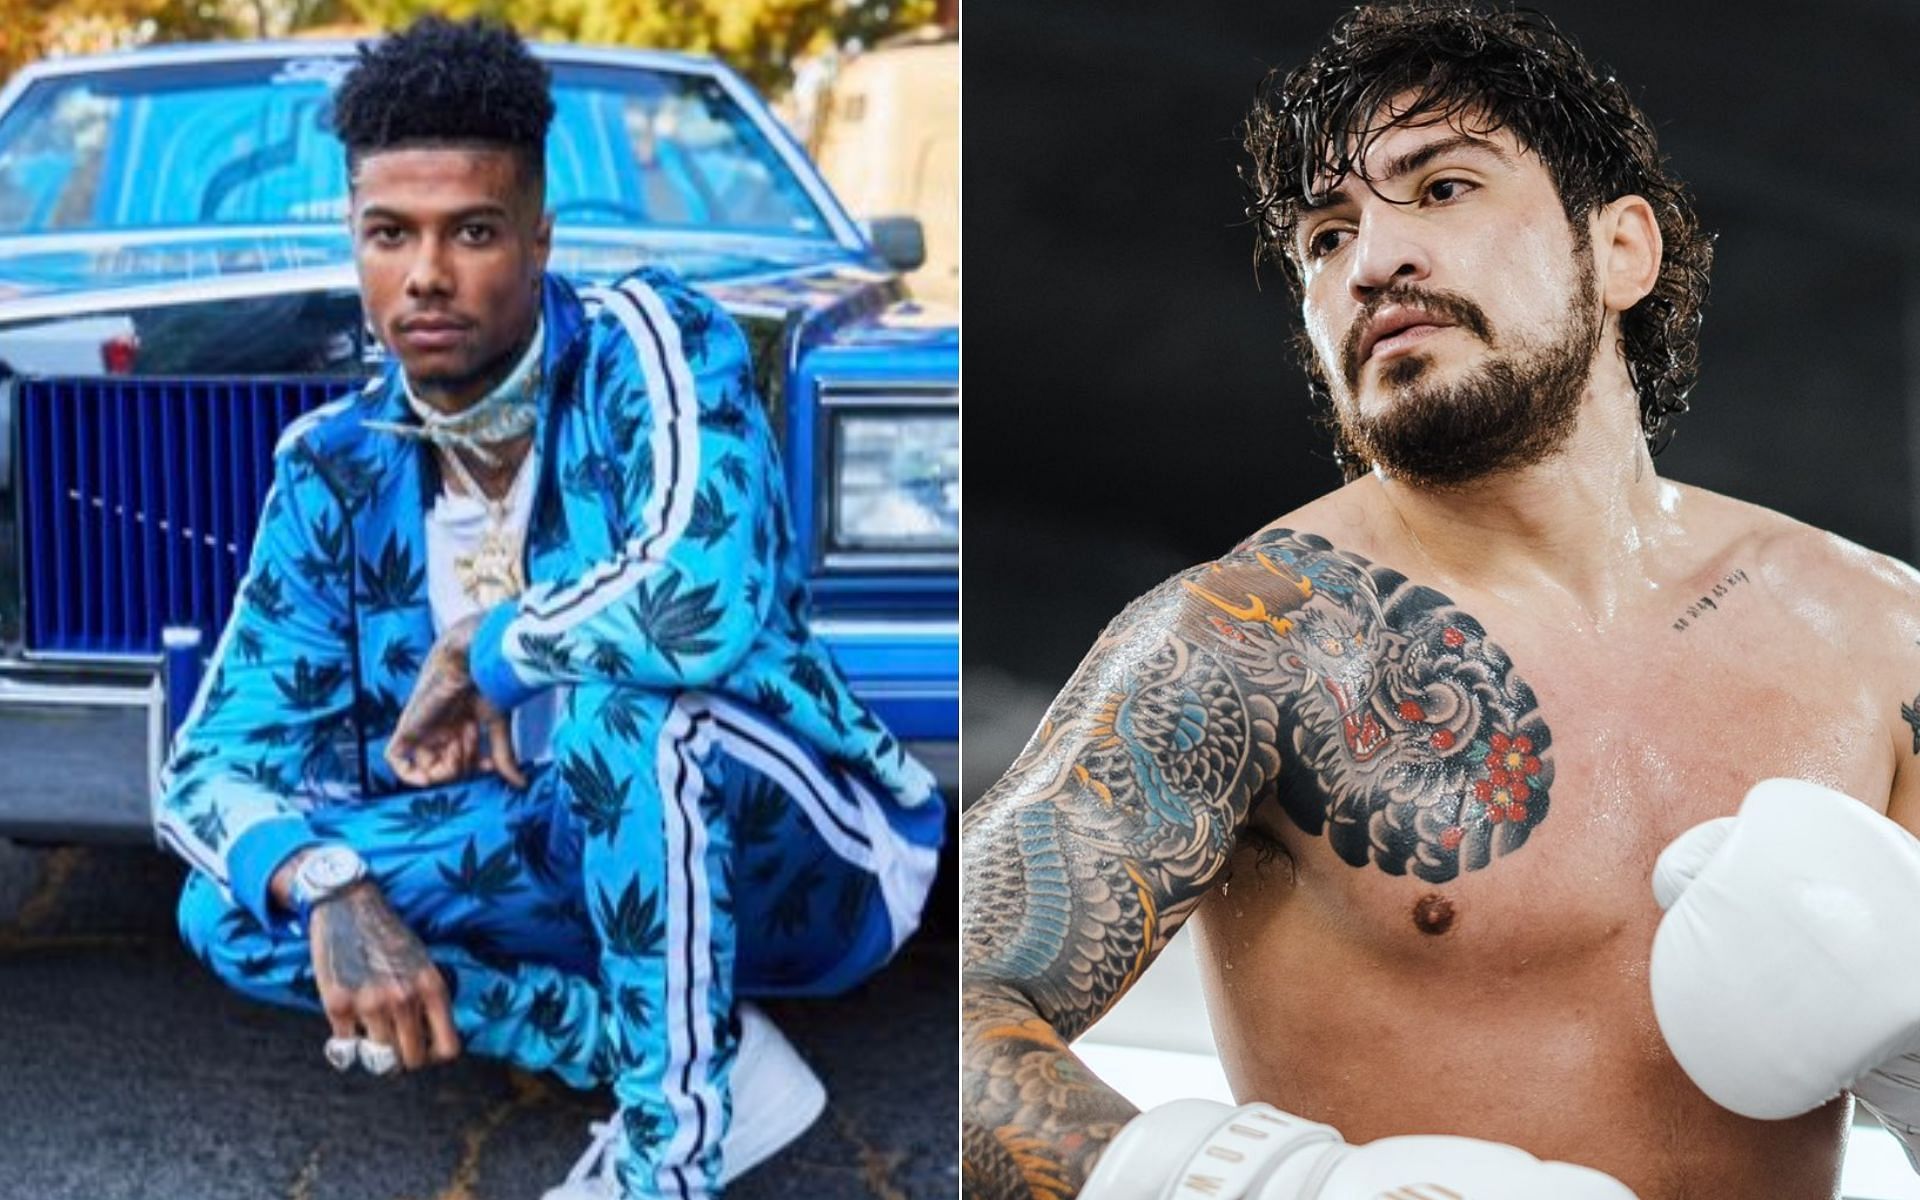 Blueface [Left], and Dillon Danis [Right] [Photo credit: @bluefacebleedem and @dillondanis - X]